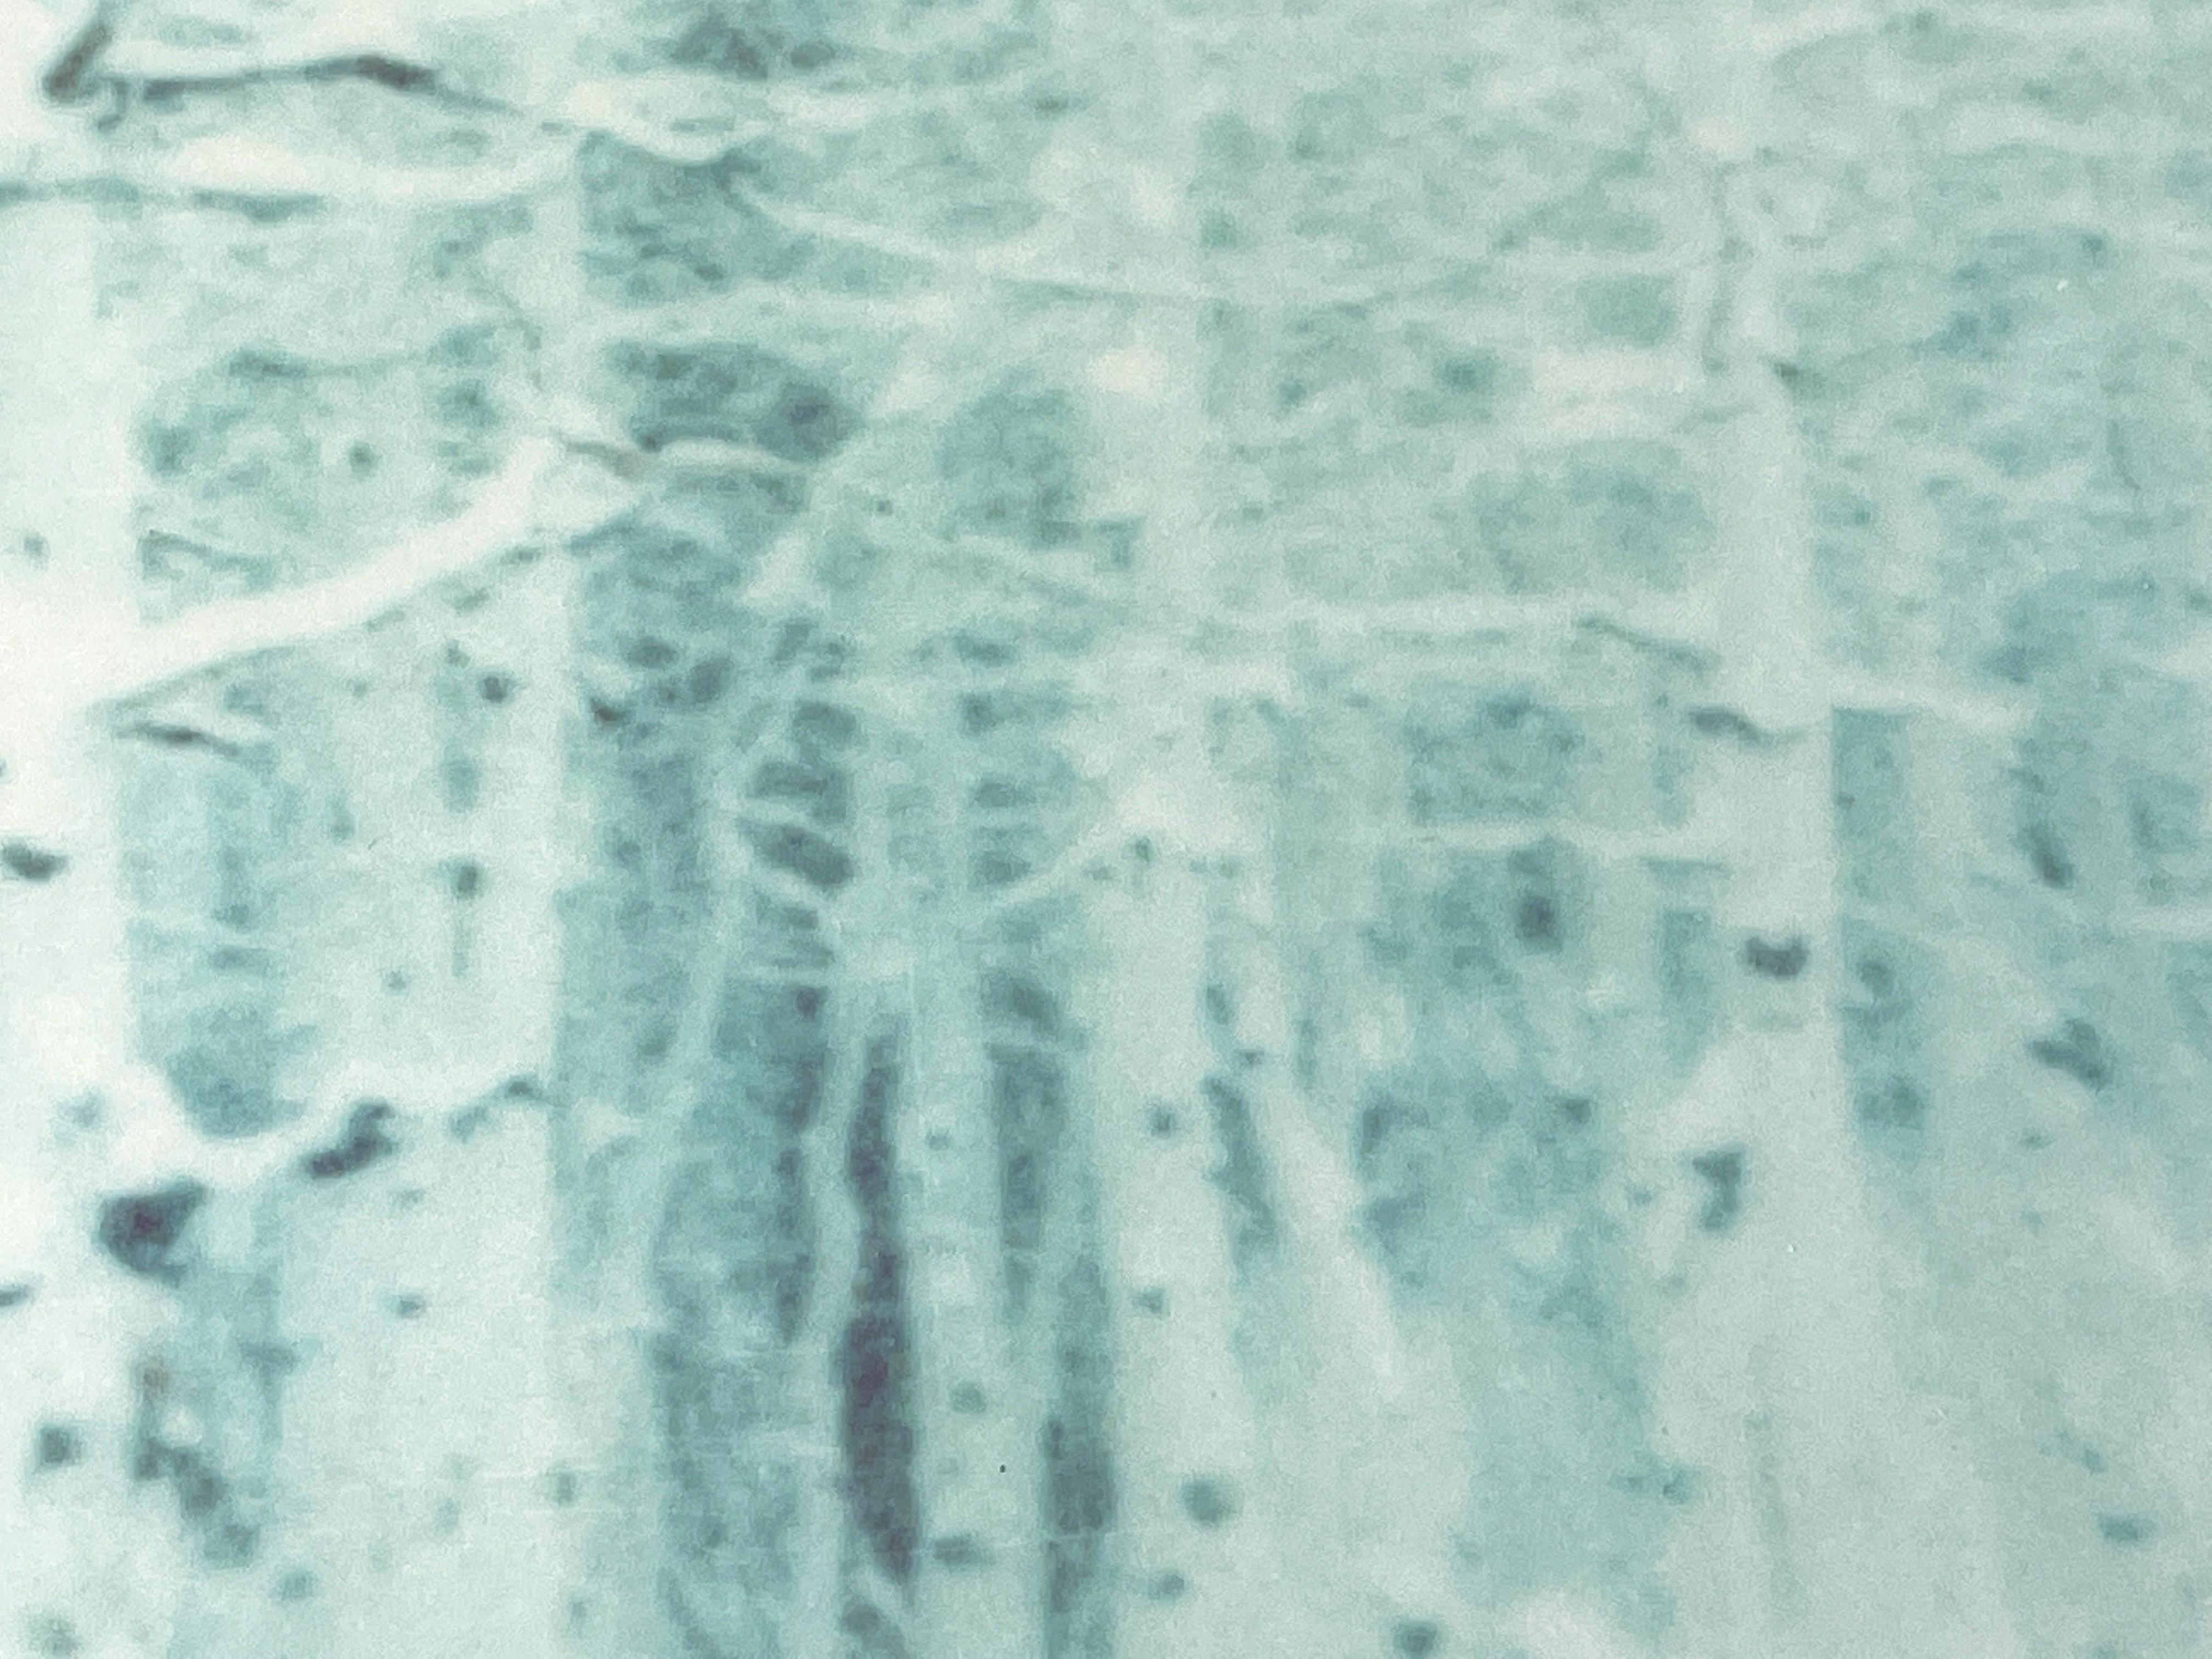 Winter (Wastelands) - Contemporary, Landscape, Polaroid - analog, mounted For Sale 2